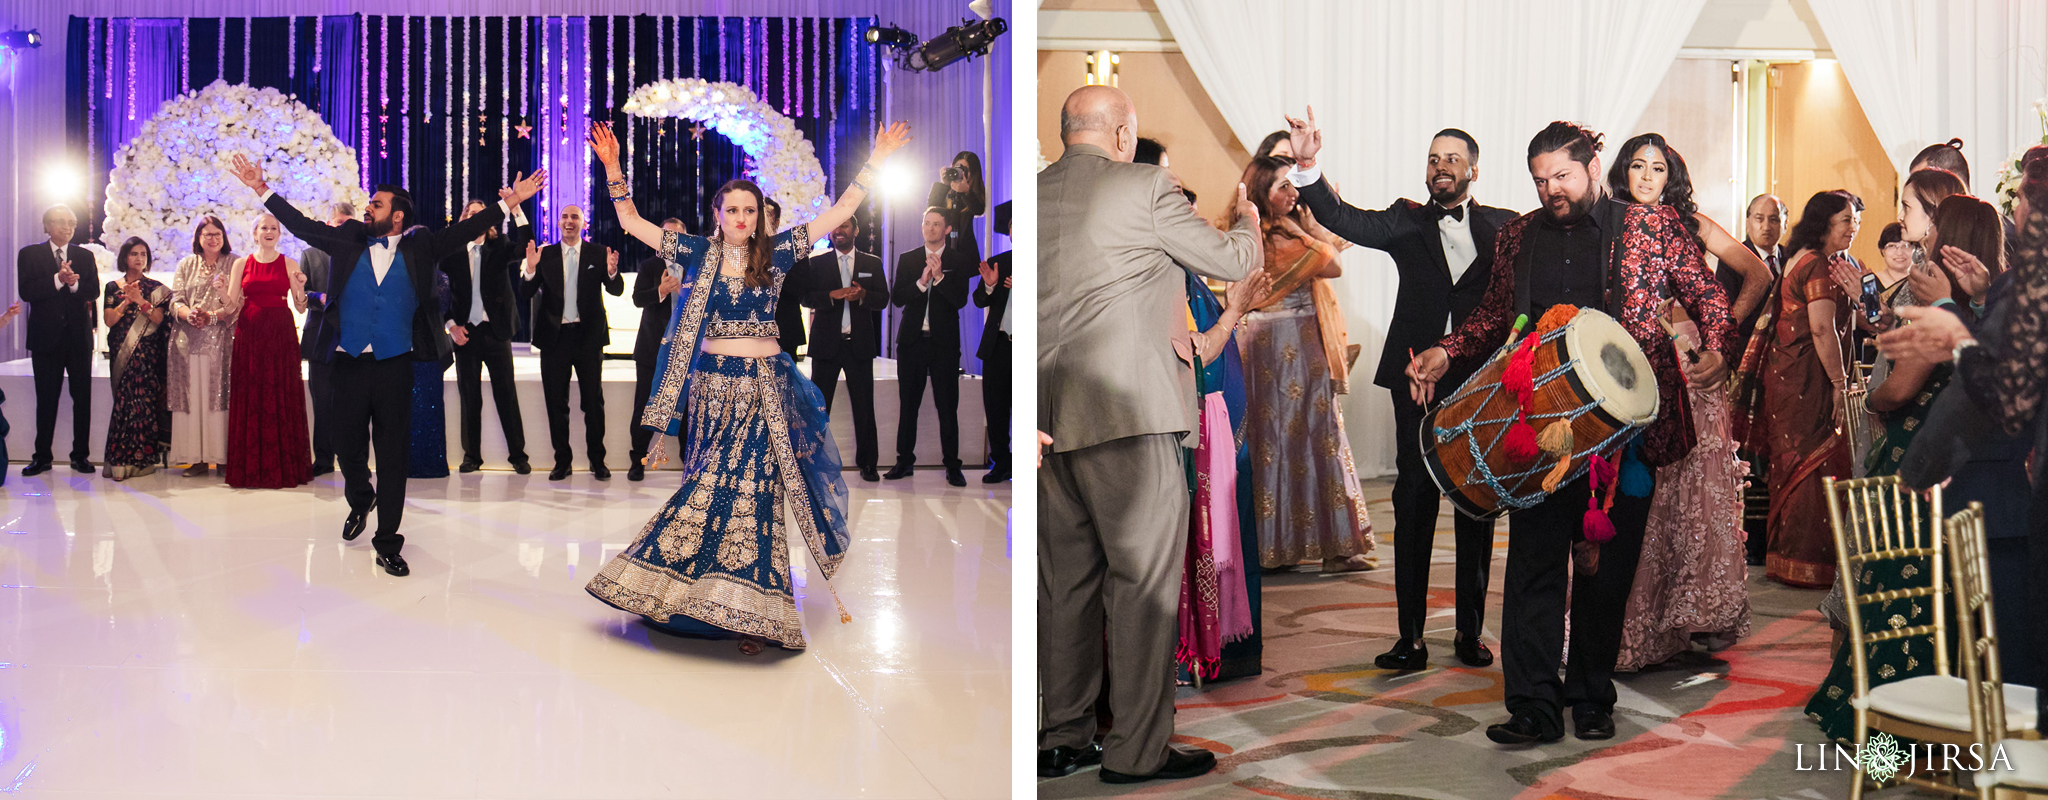 14 Hotel Irvine Joint Indian Reception Wedding Photography